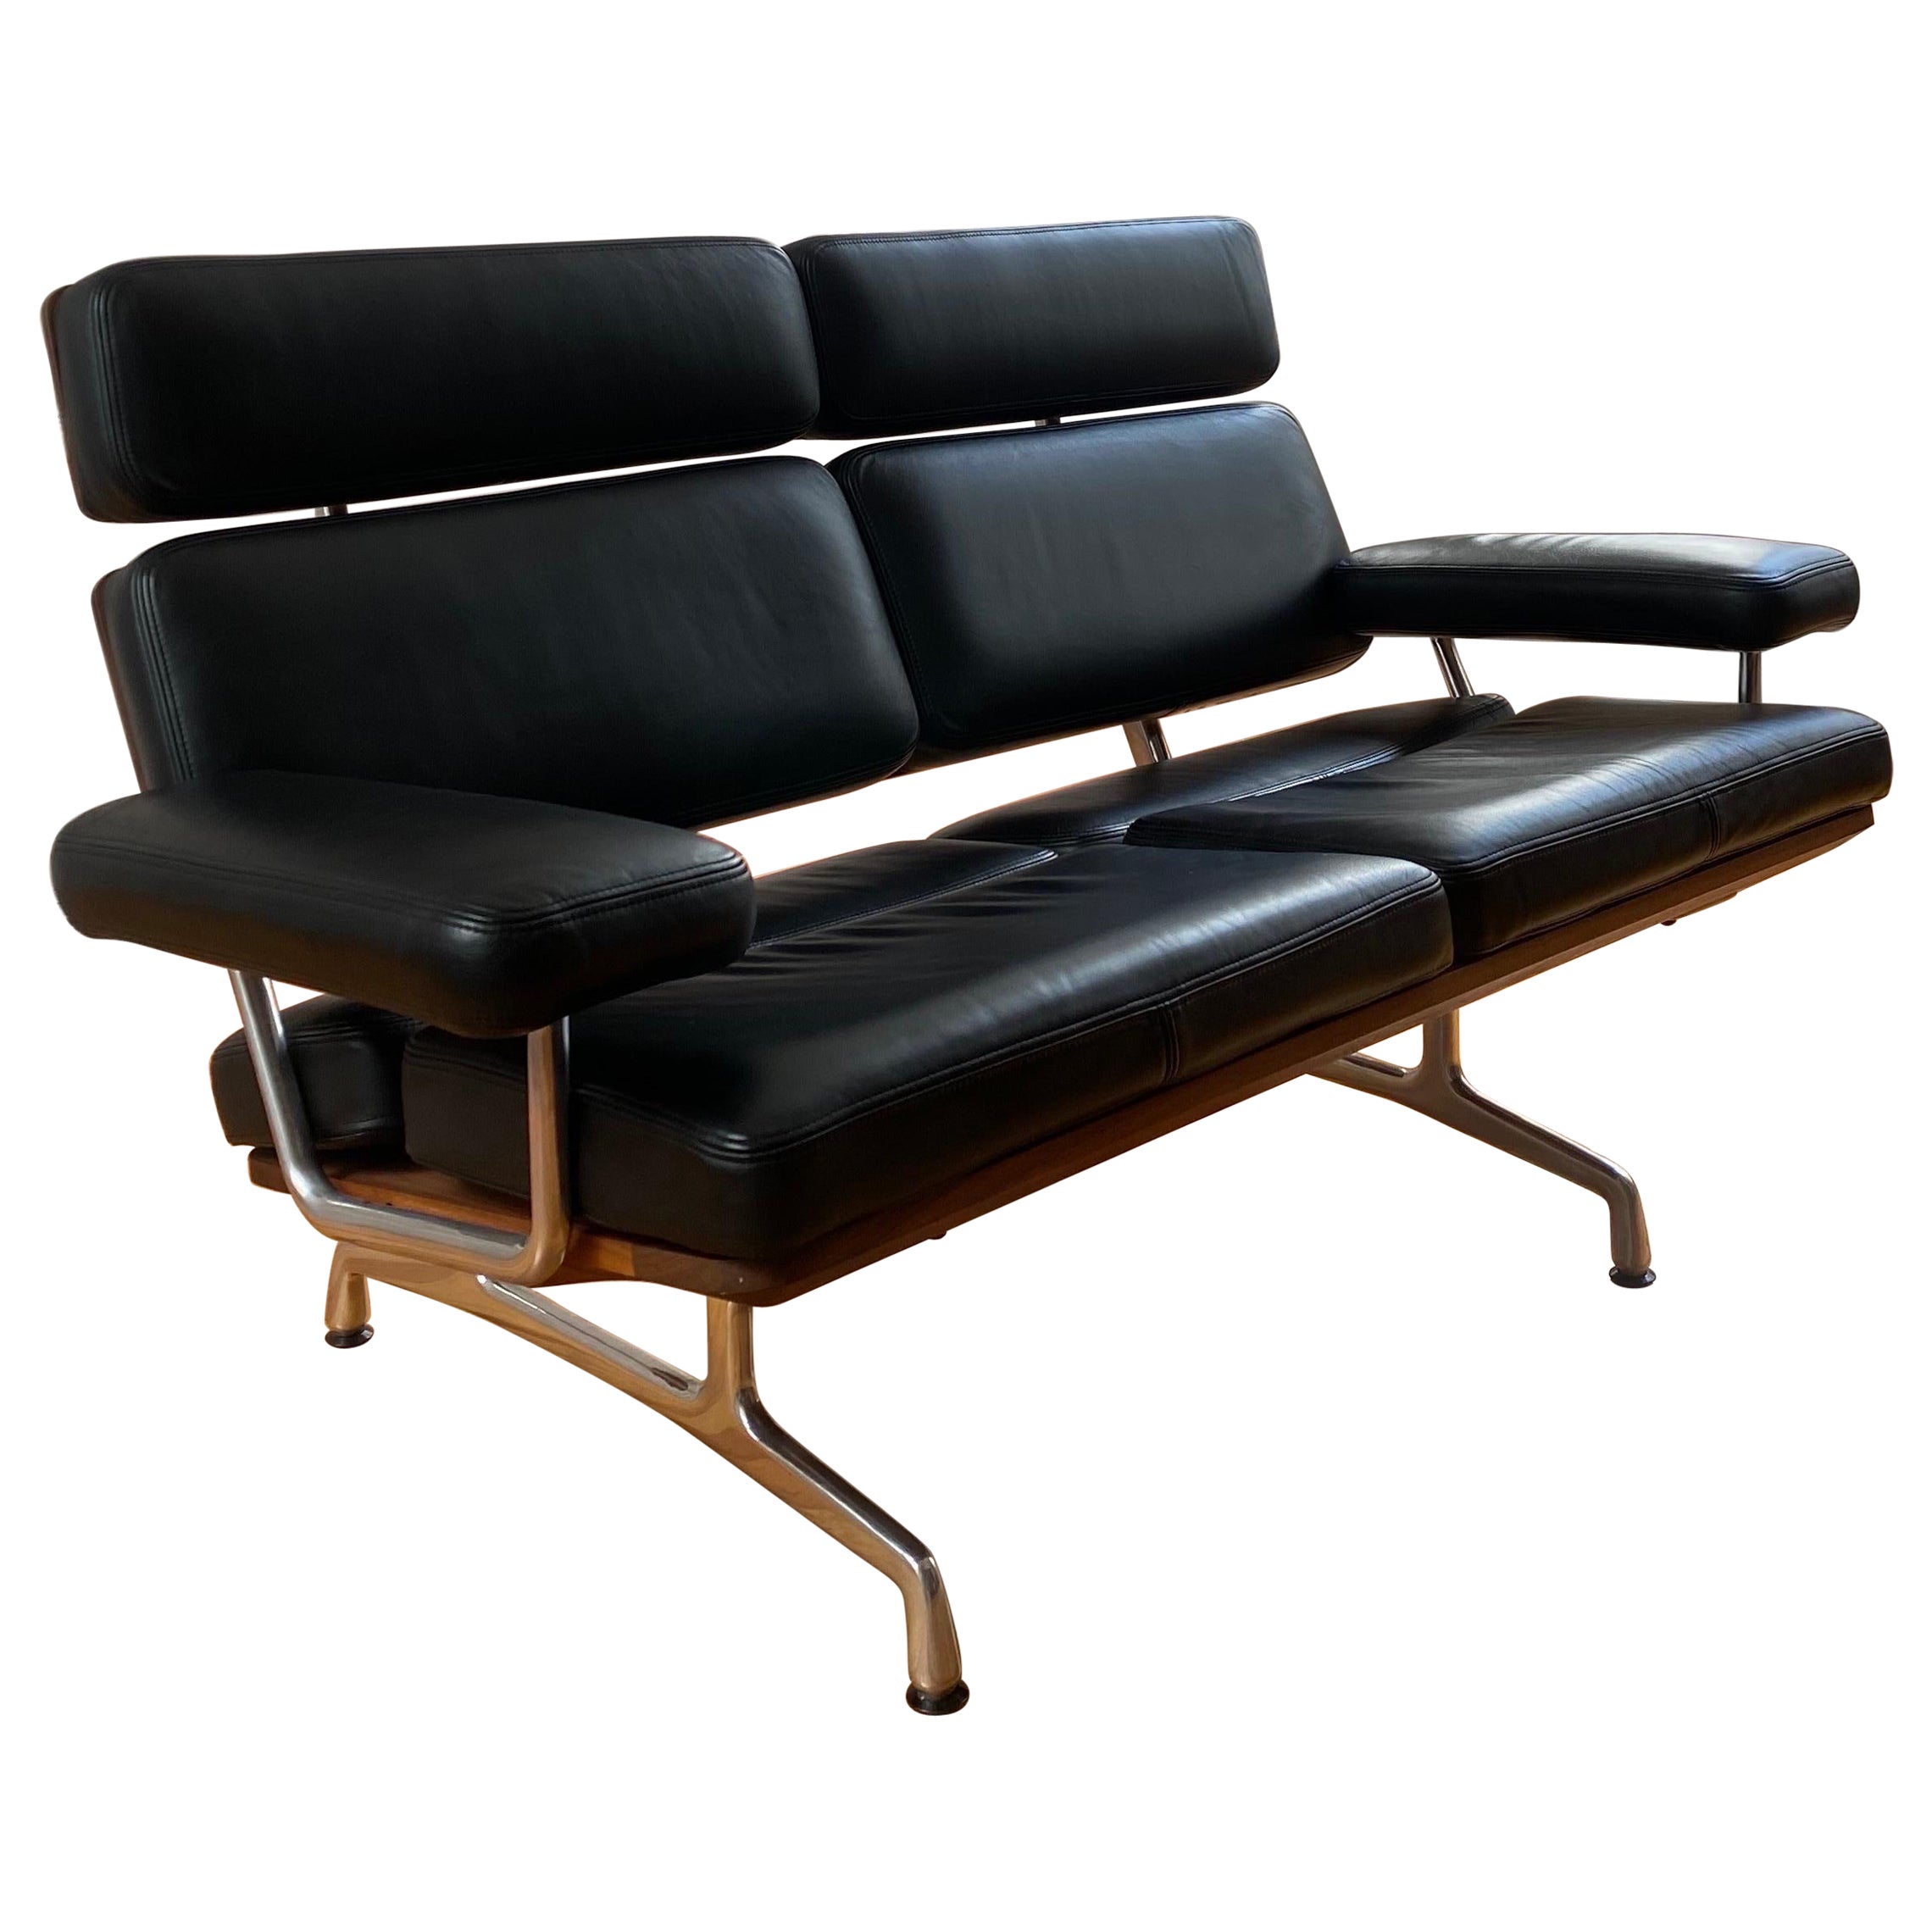 Eames Sofa Produced by Herman Miller in Black Leather, Walnut and Aluminum For Sale